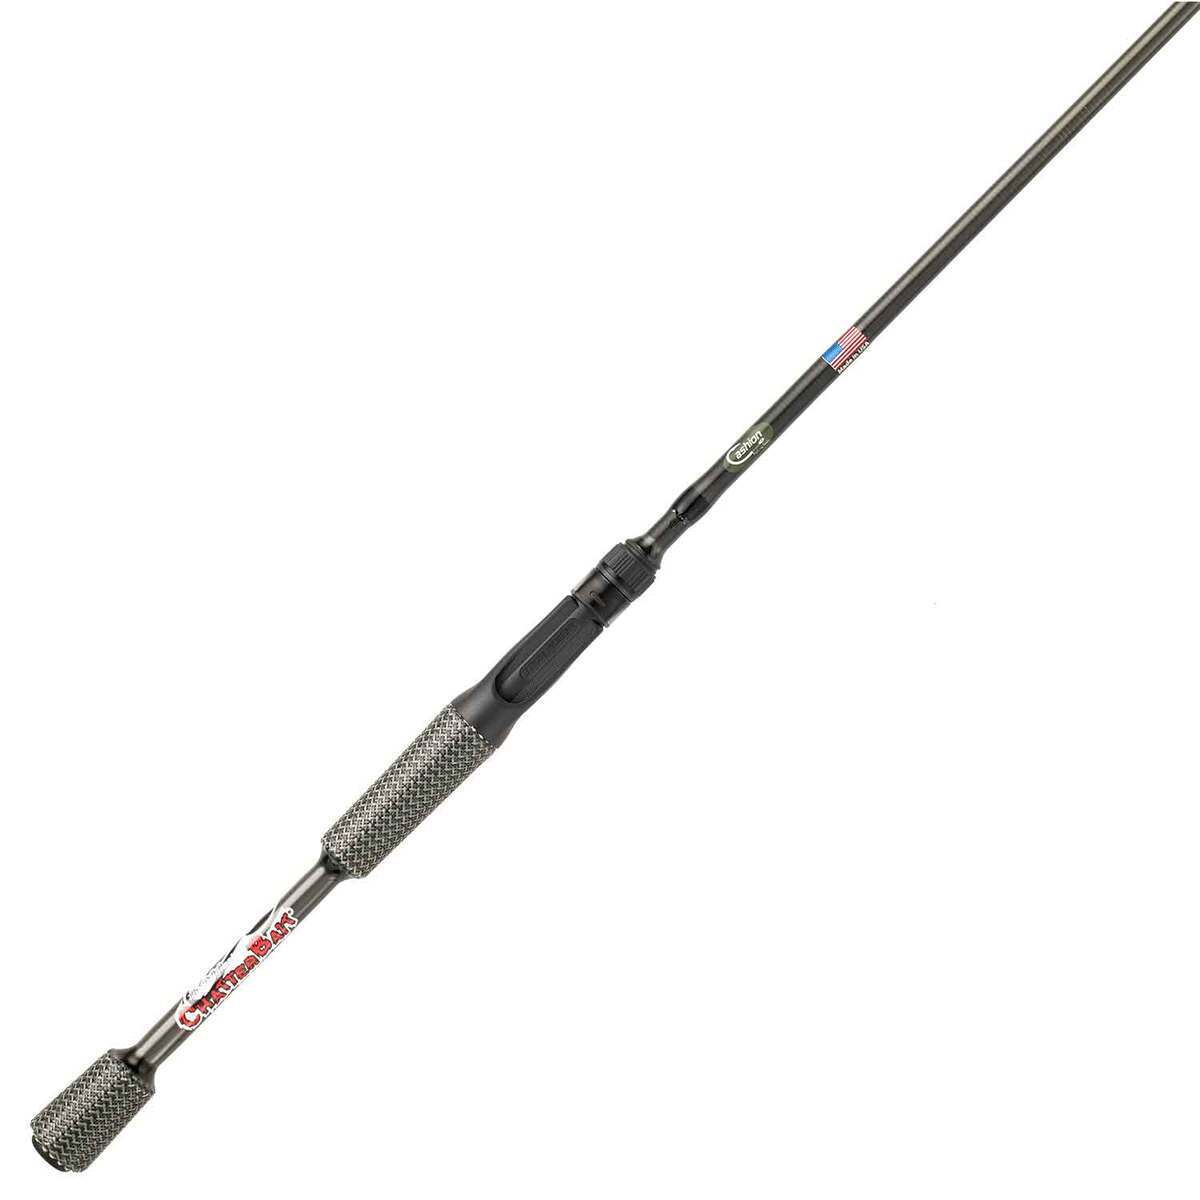 Cashion Fishing Rods ICON Chatterbait Casting Rod - 7ft 1in